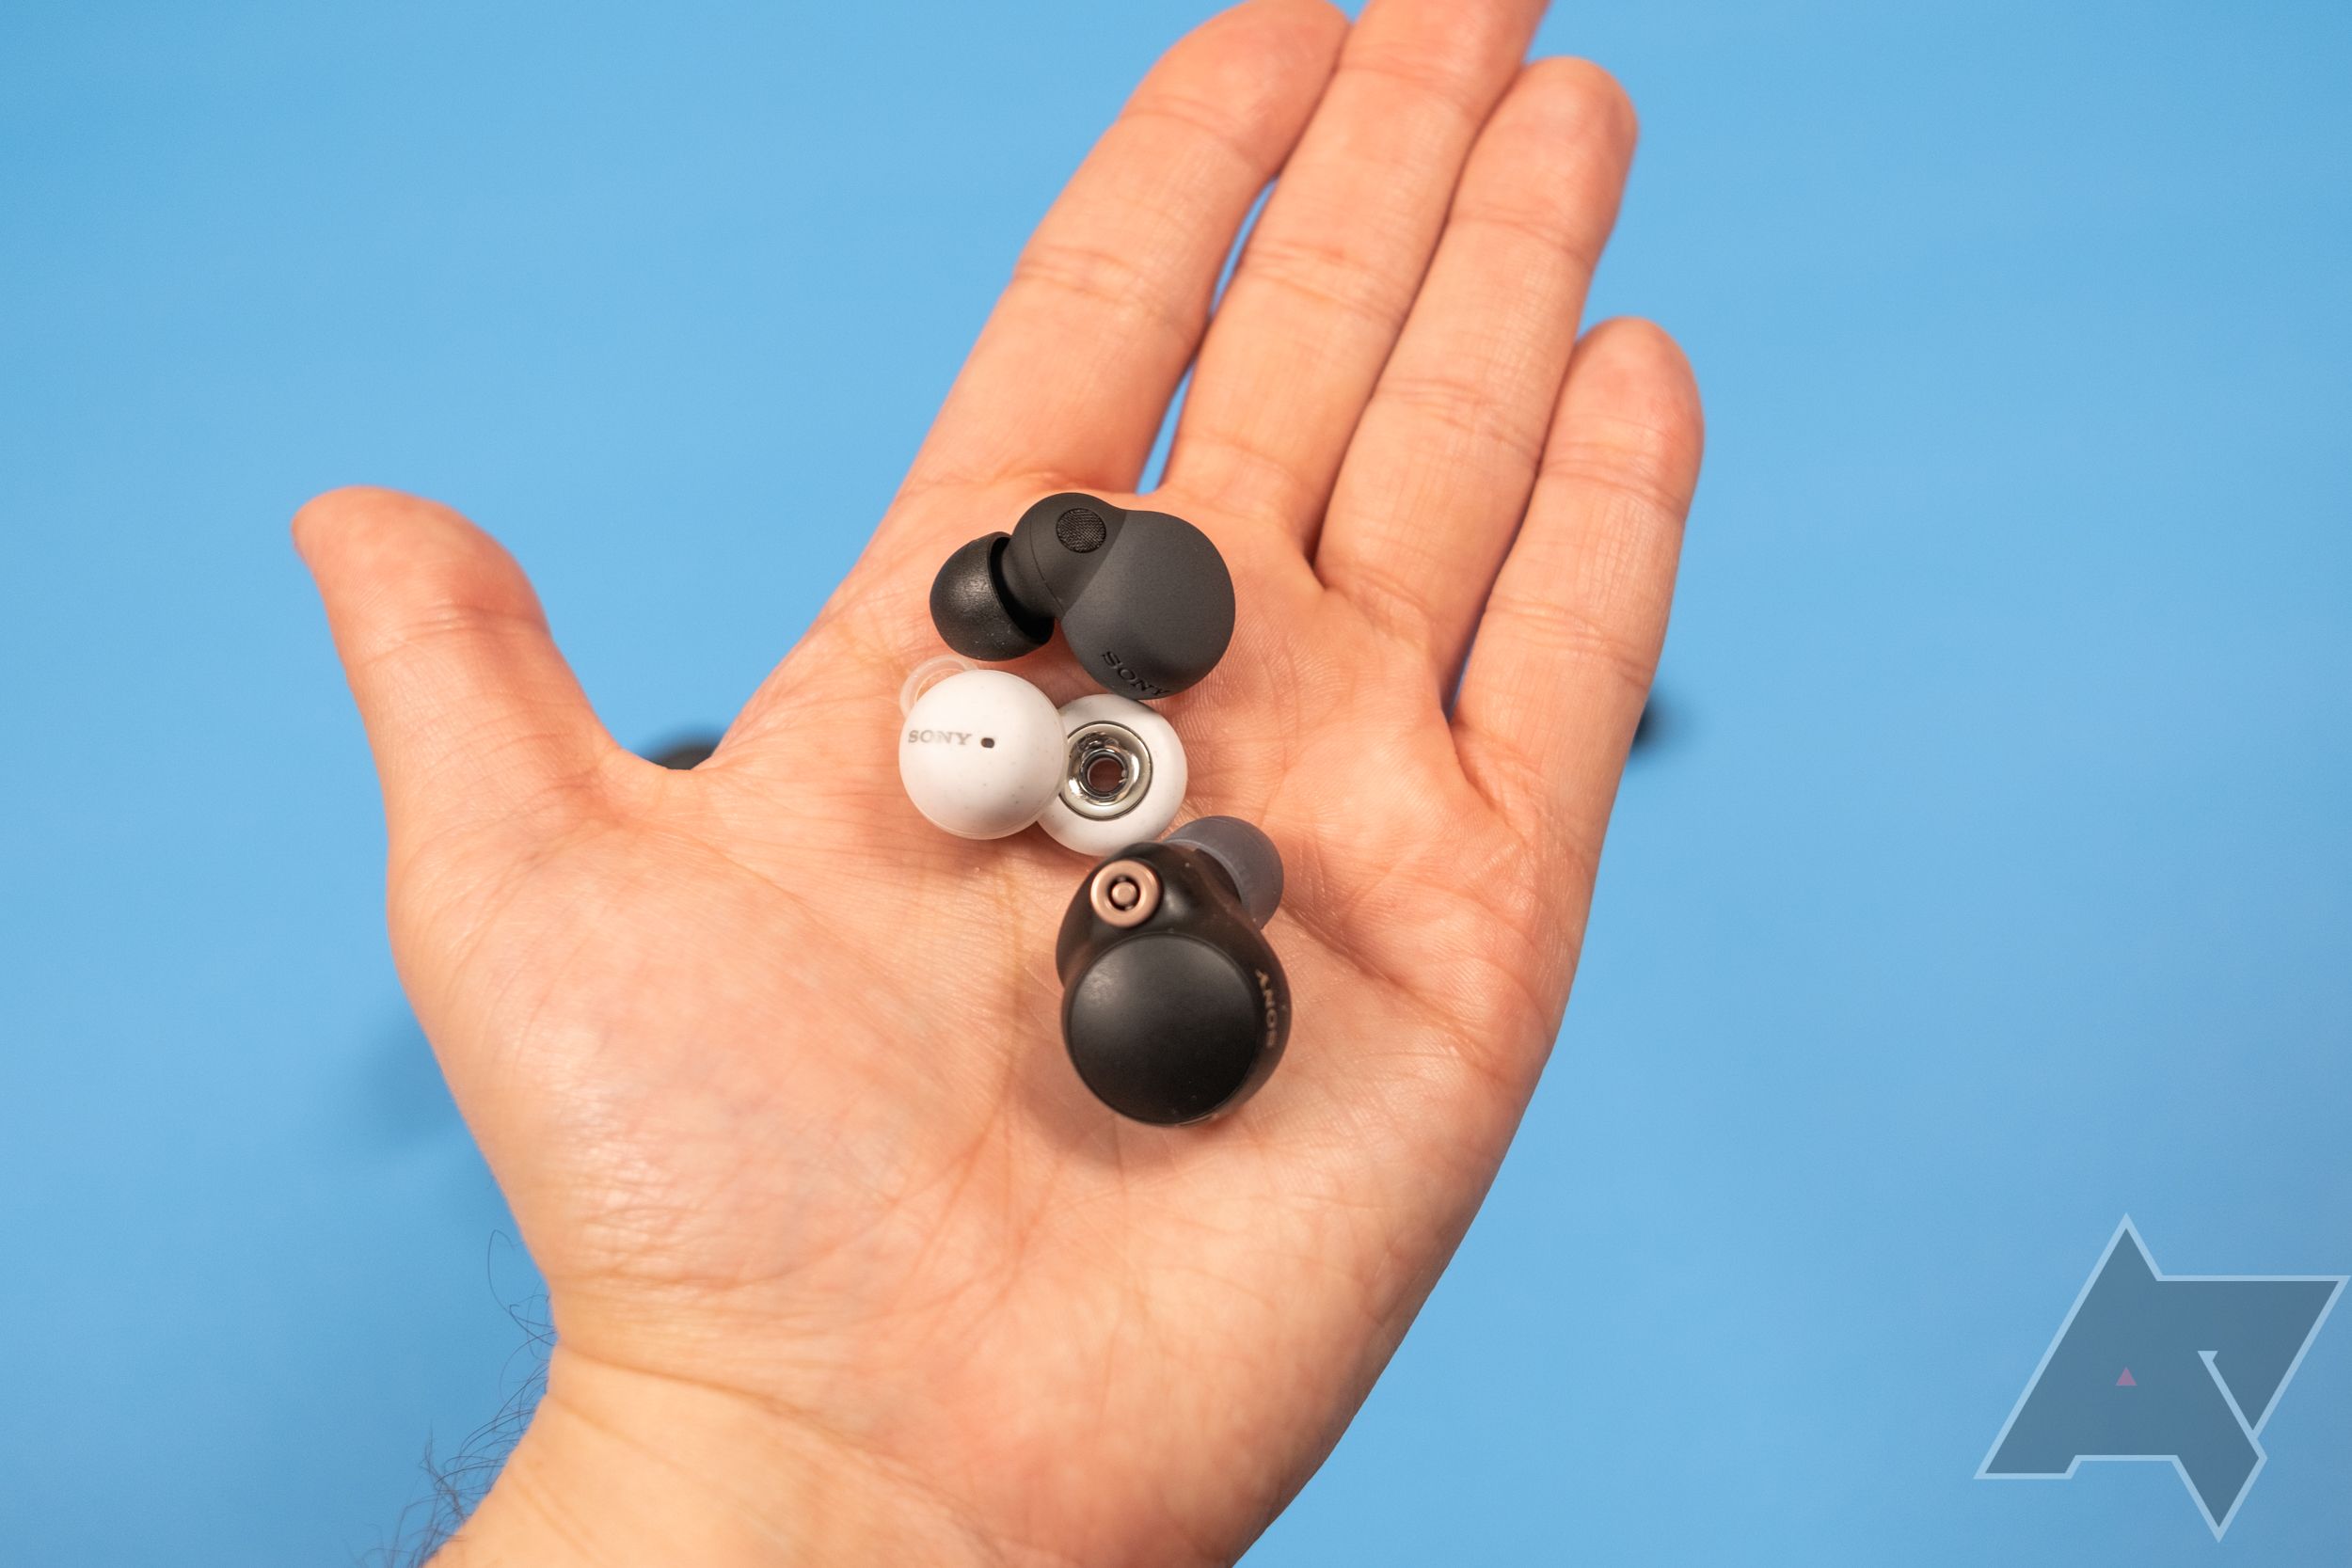 Sony LinkBuds S, LinkBuds, and WF-1000XM4 in a person's hand.